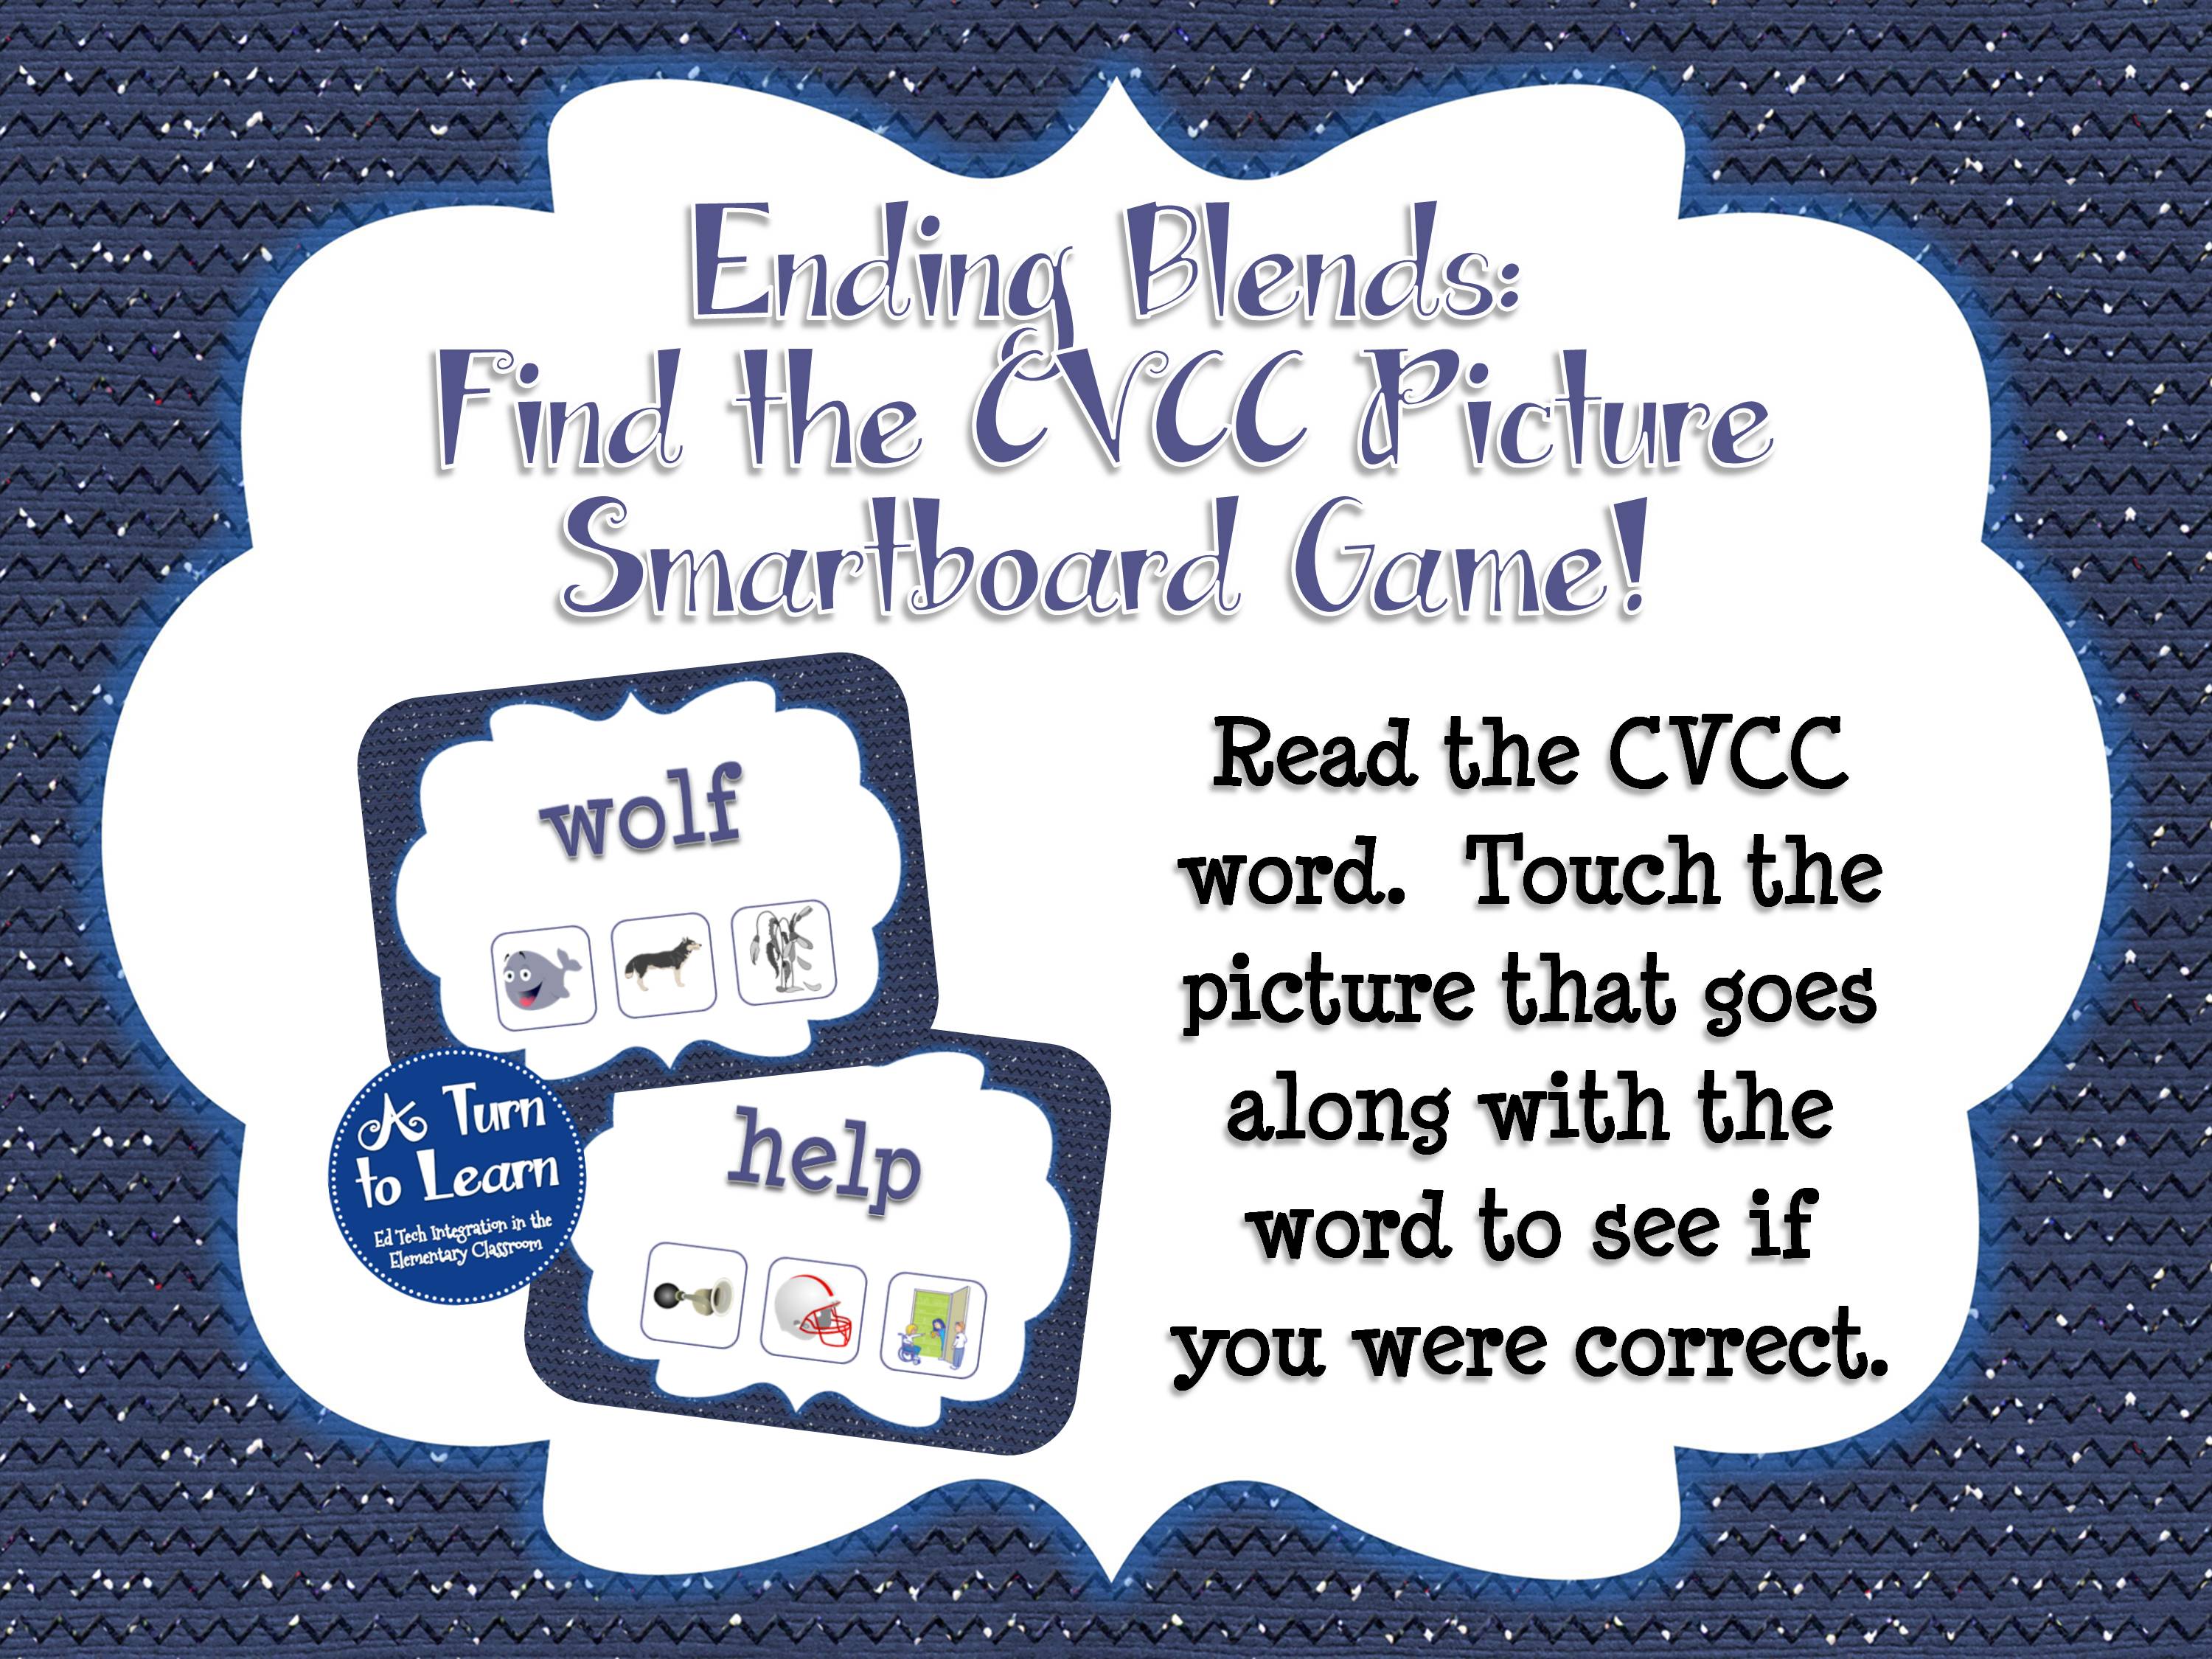 Ending Blends Smartboard Game - CVCC Find the Picture